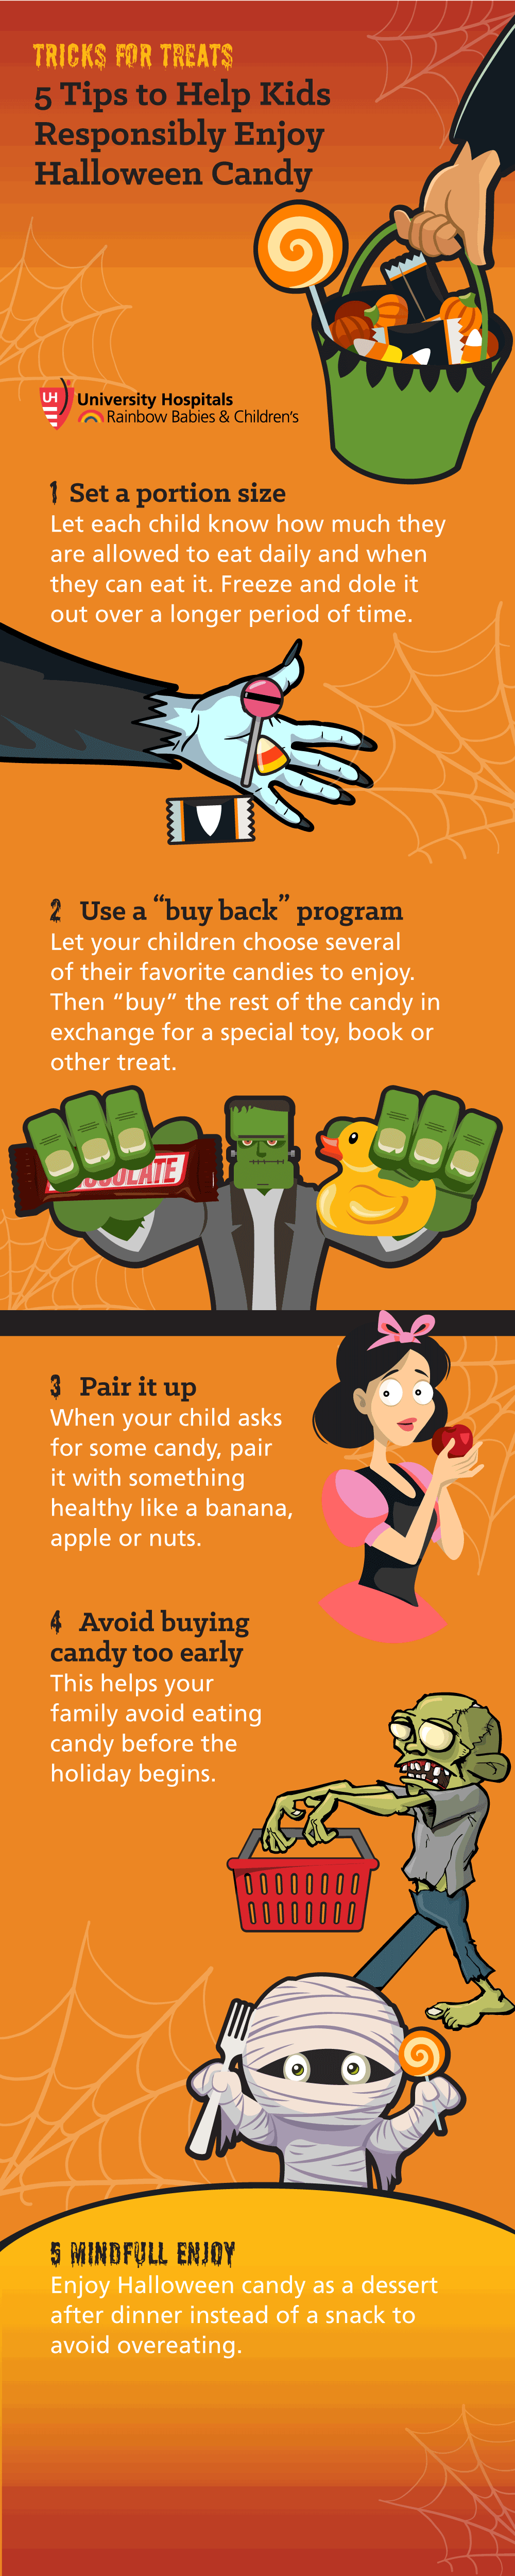 Tricks for Treats: Tips to help kids responsibly enjoy Halloween candy